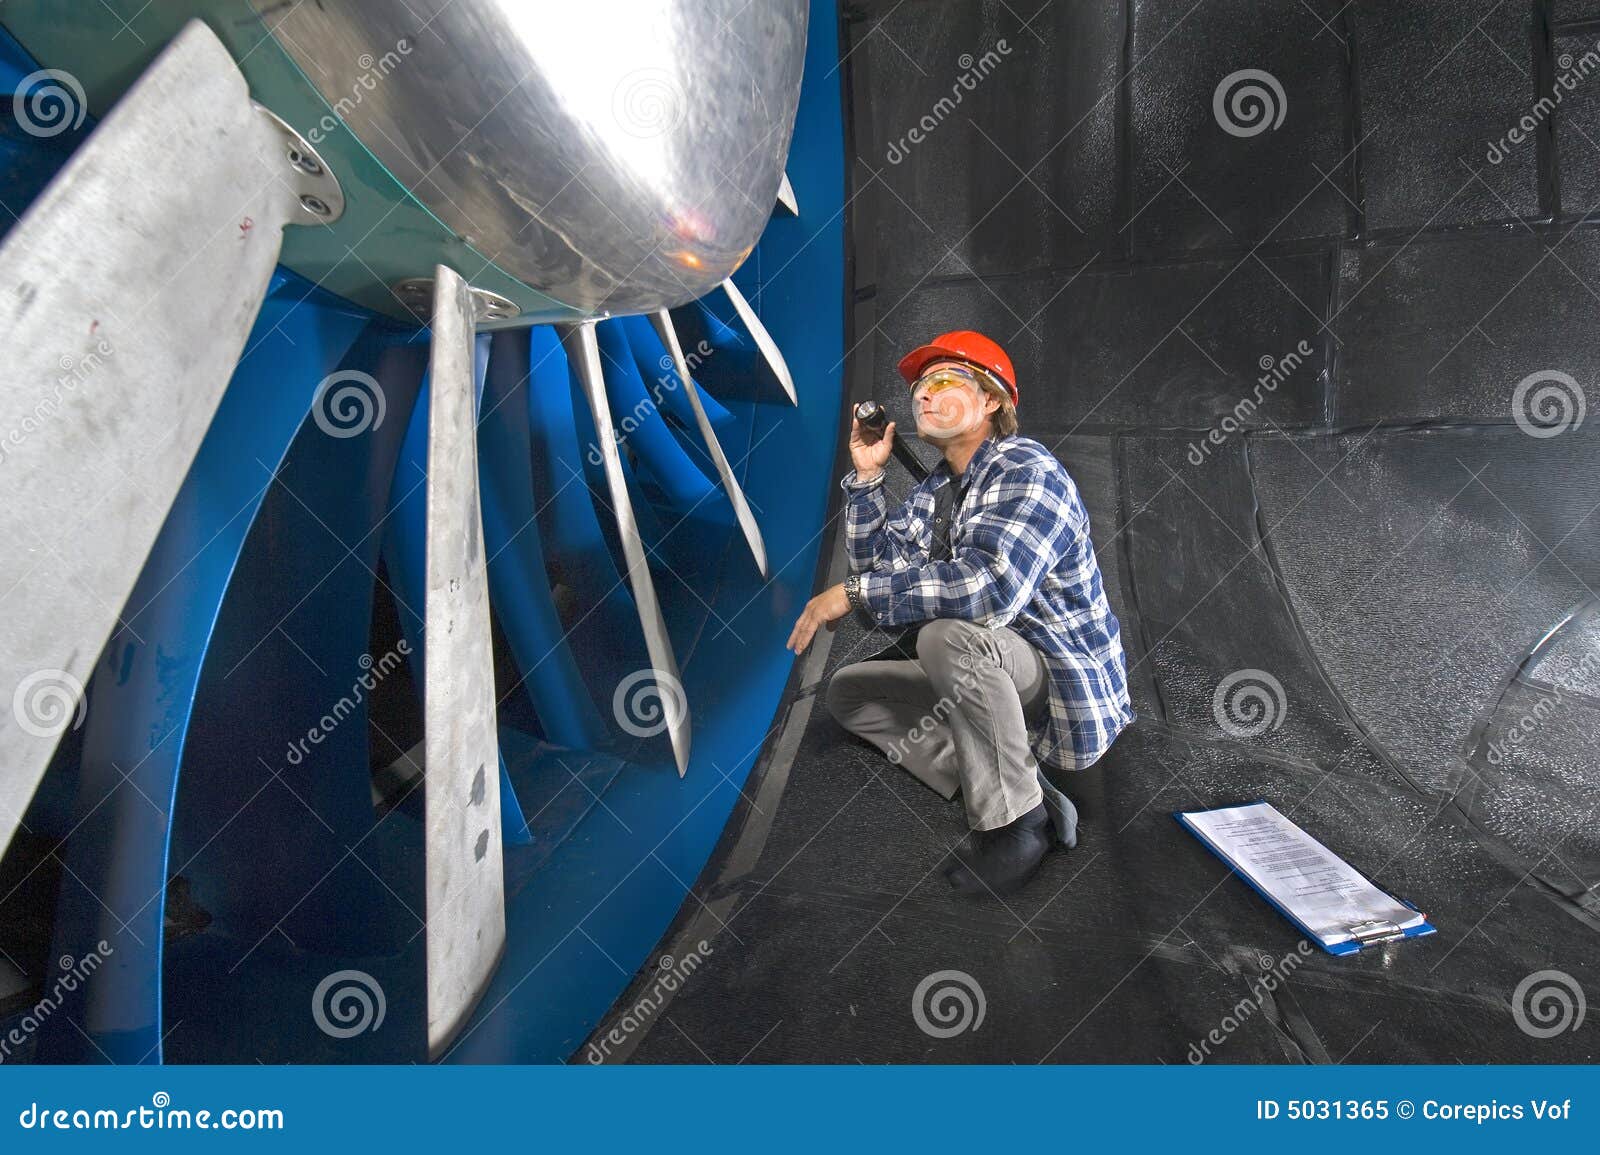 inspecting a windtunnel